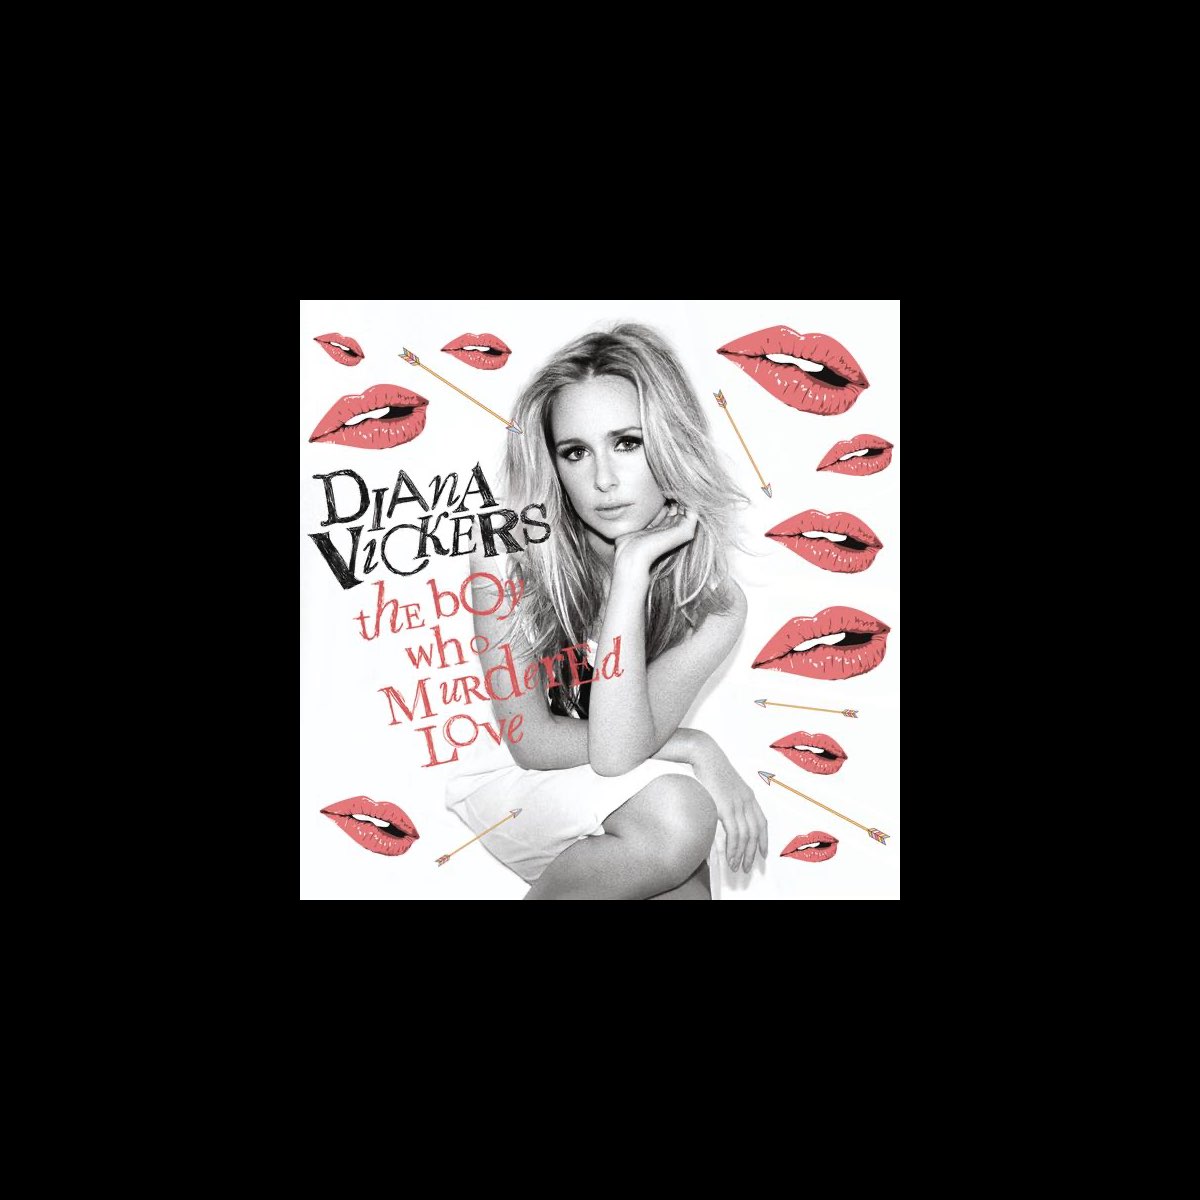 The Boy Who Murdered Love (Guena LG Remix) - Single by Diana Vickers on  Apple Music